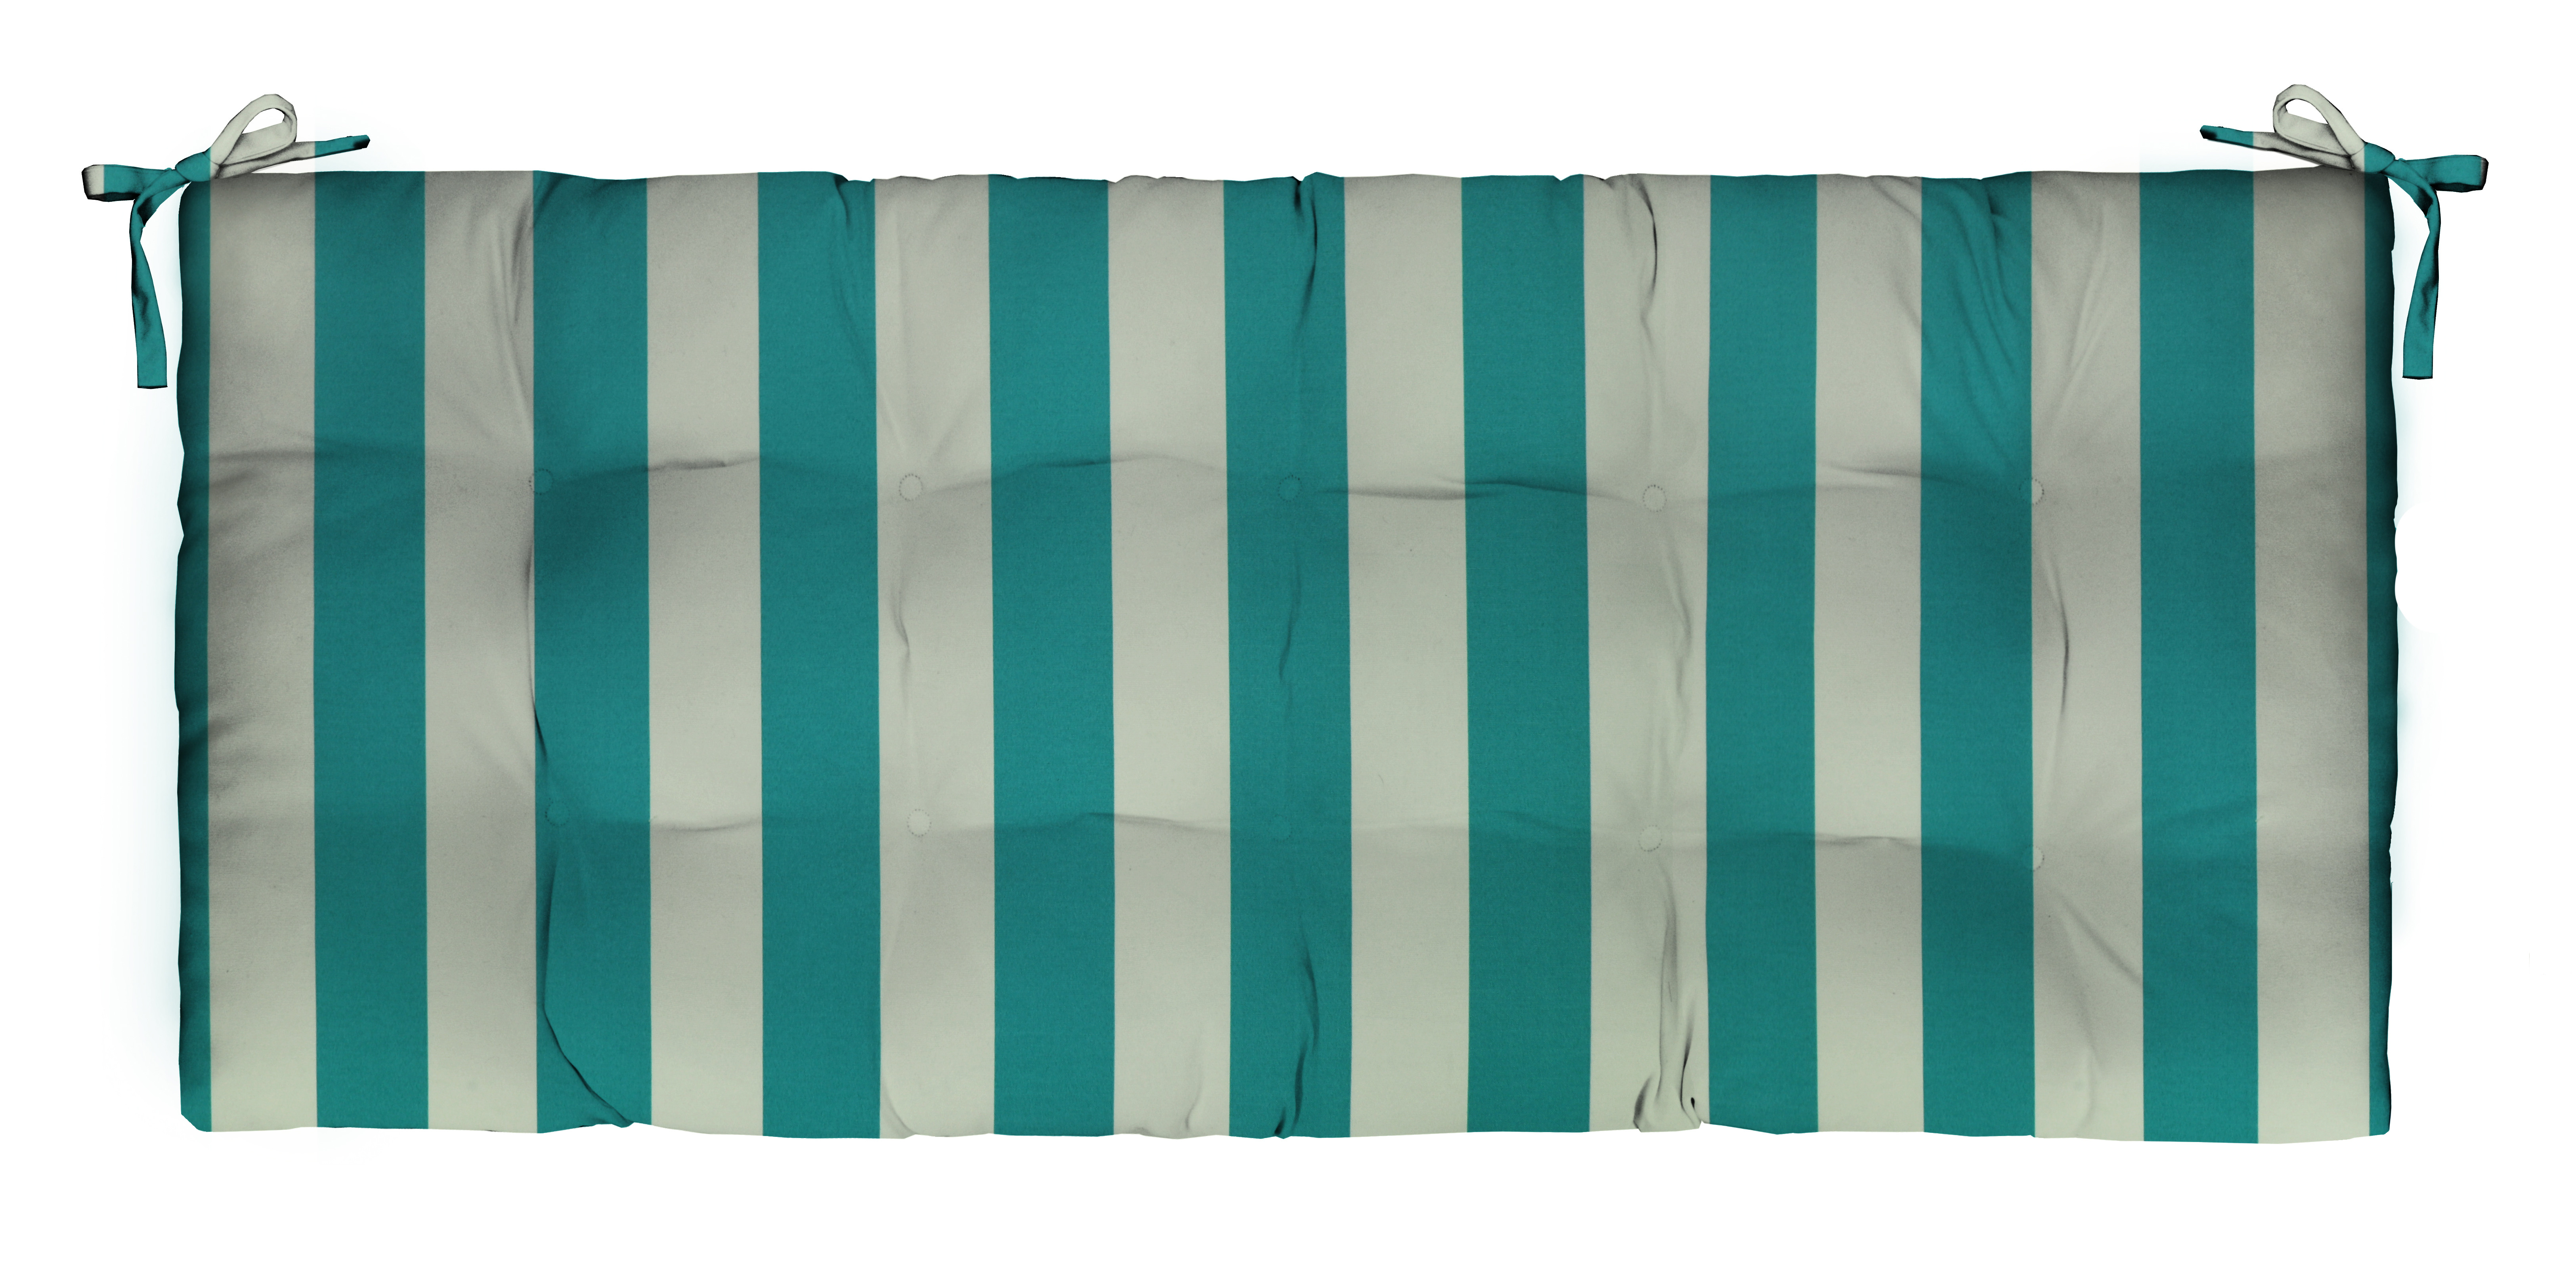 Rsh dcor Indoor Outdoor 2 Tufted Bench Cushion with Ties (36 x 14 x 2), Cancun & White Stripe